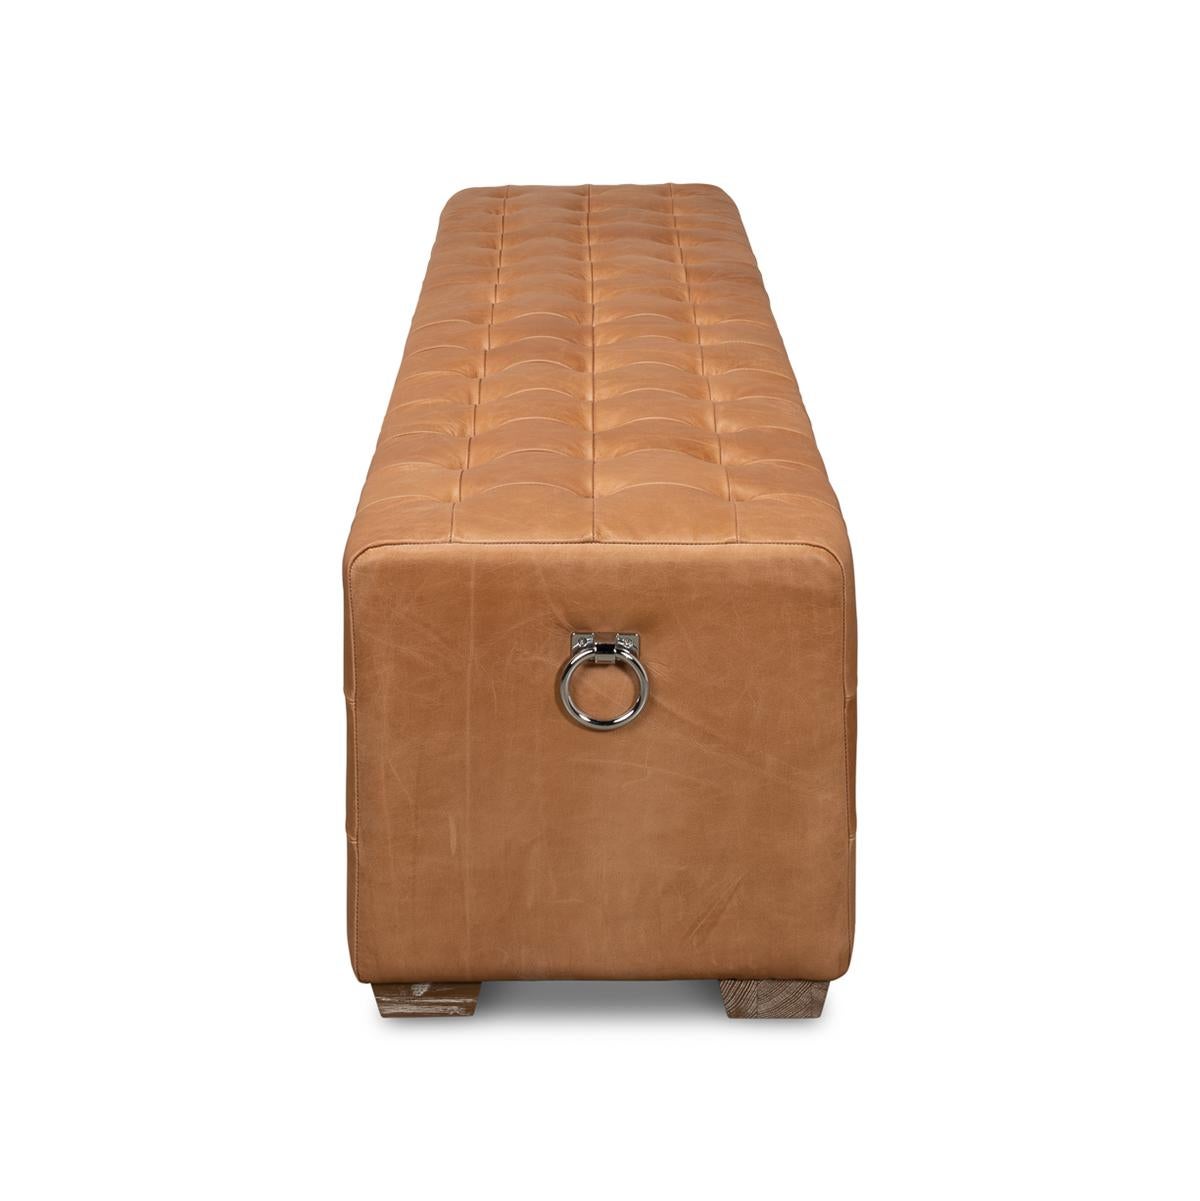 Asian Modern Tufted Leather Upholstered Bench For Sale